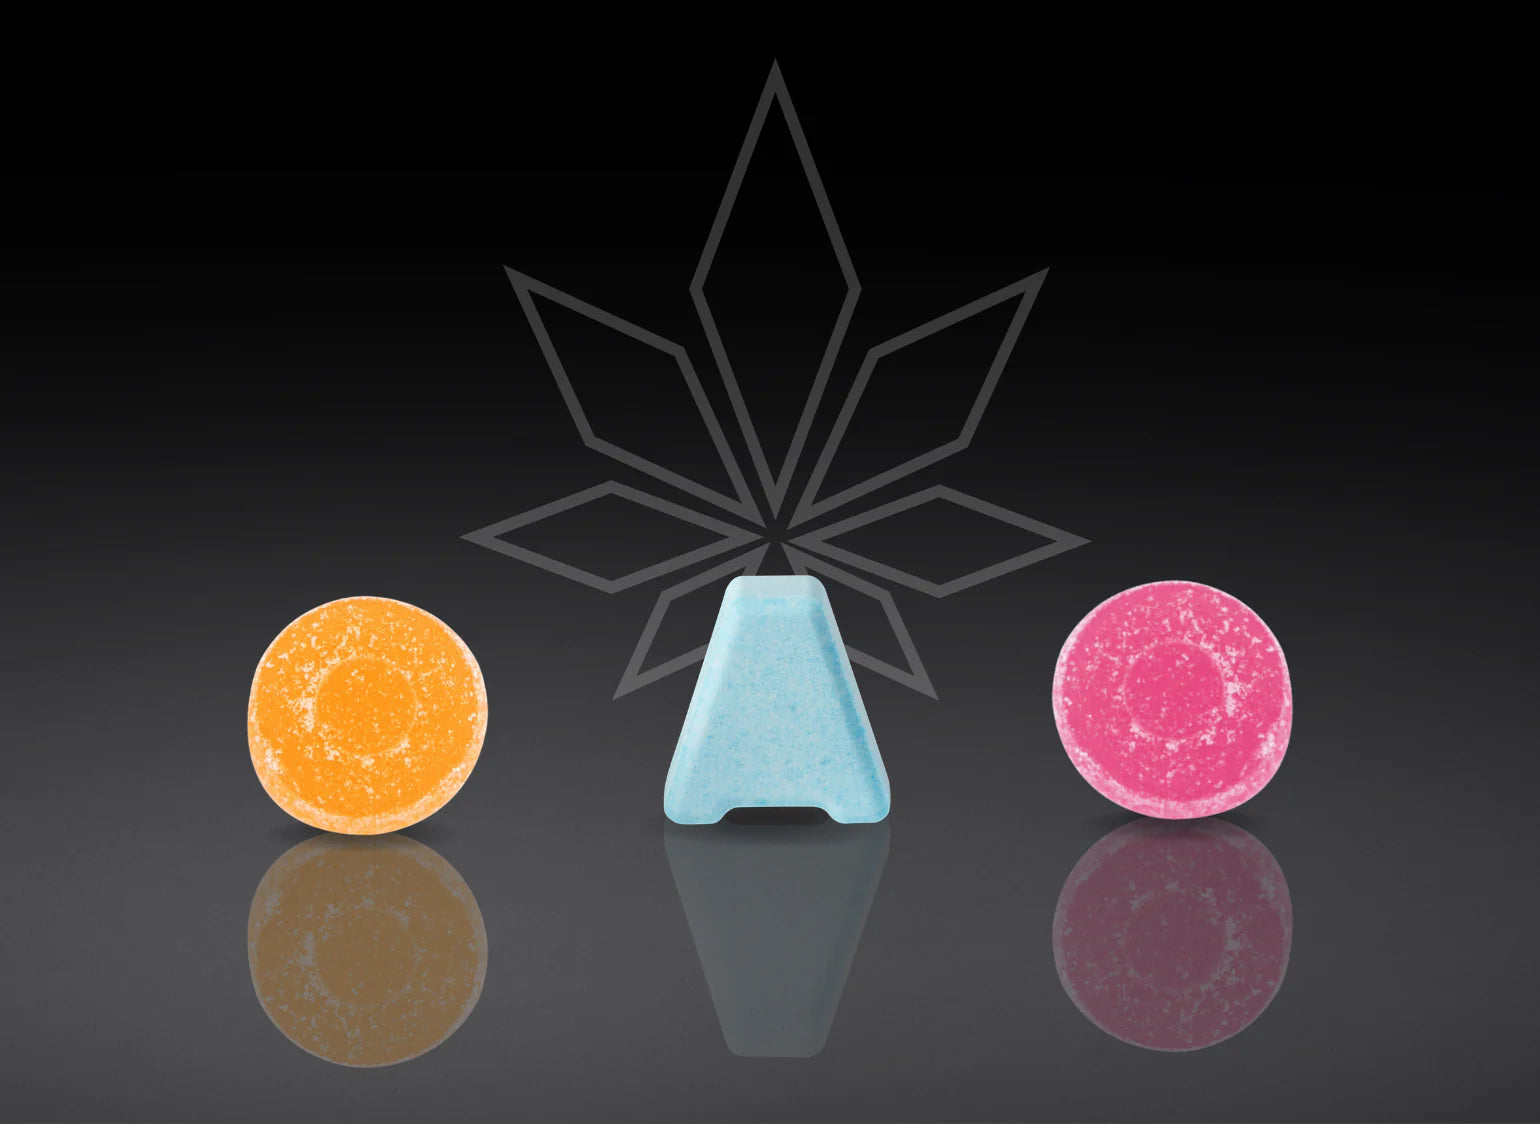 Looking for cannabis edibles near you? Look no further than Ashario Cannabis, where you'll discover an amazing selection of mouth-watering treats to satisfy your cravings! 